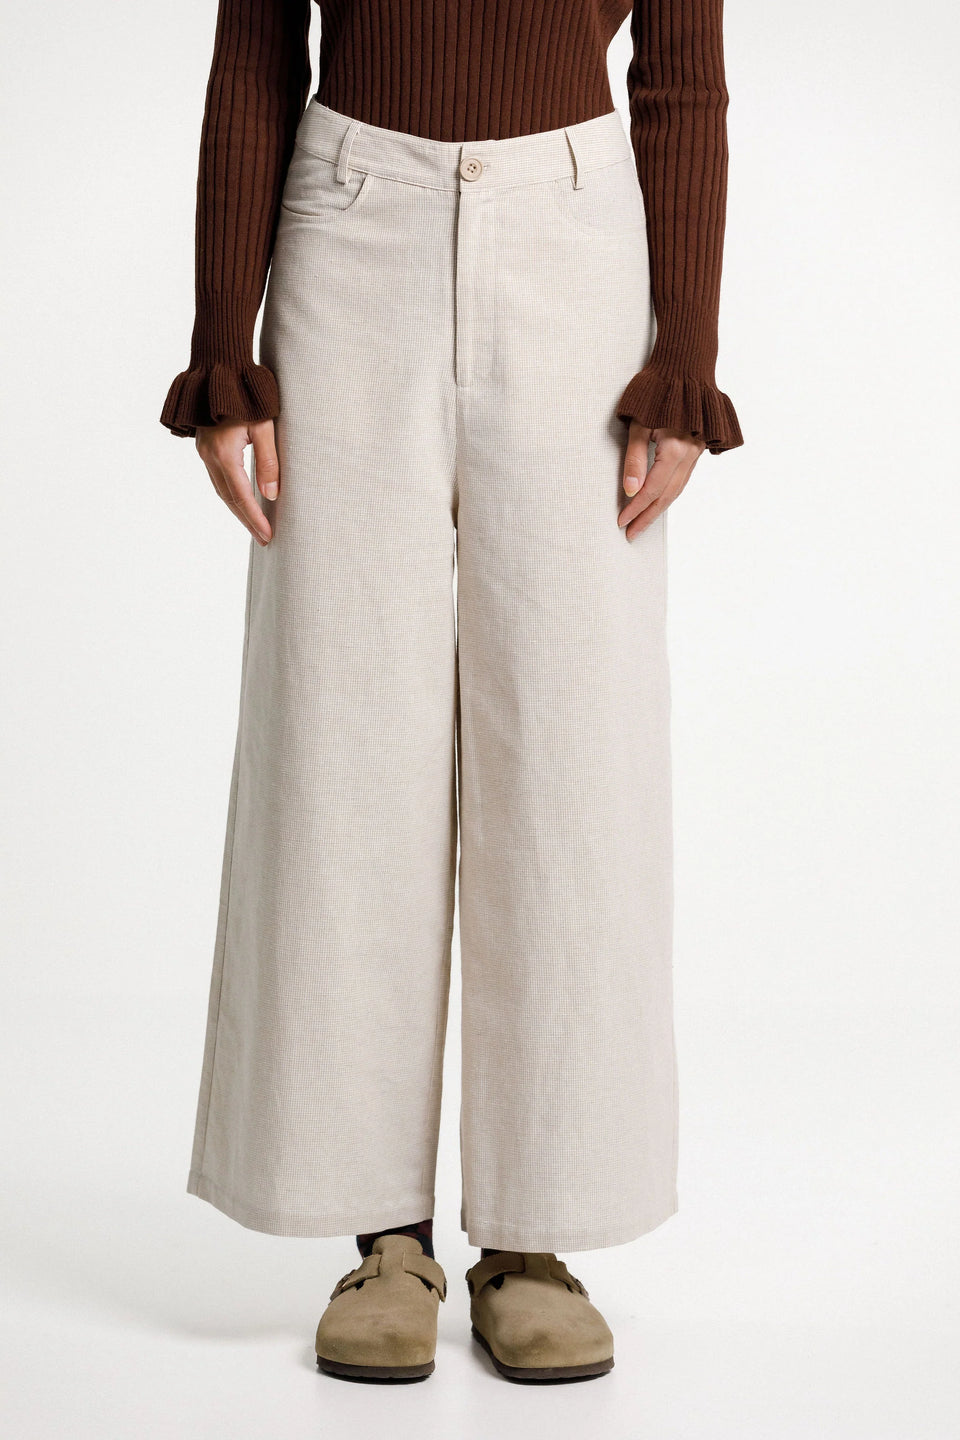 Thing Thing Peggy Pant - Cream Latte Check